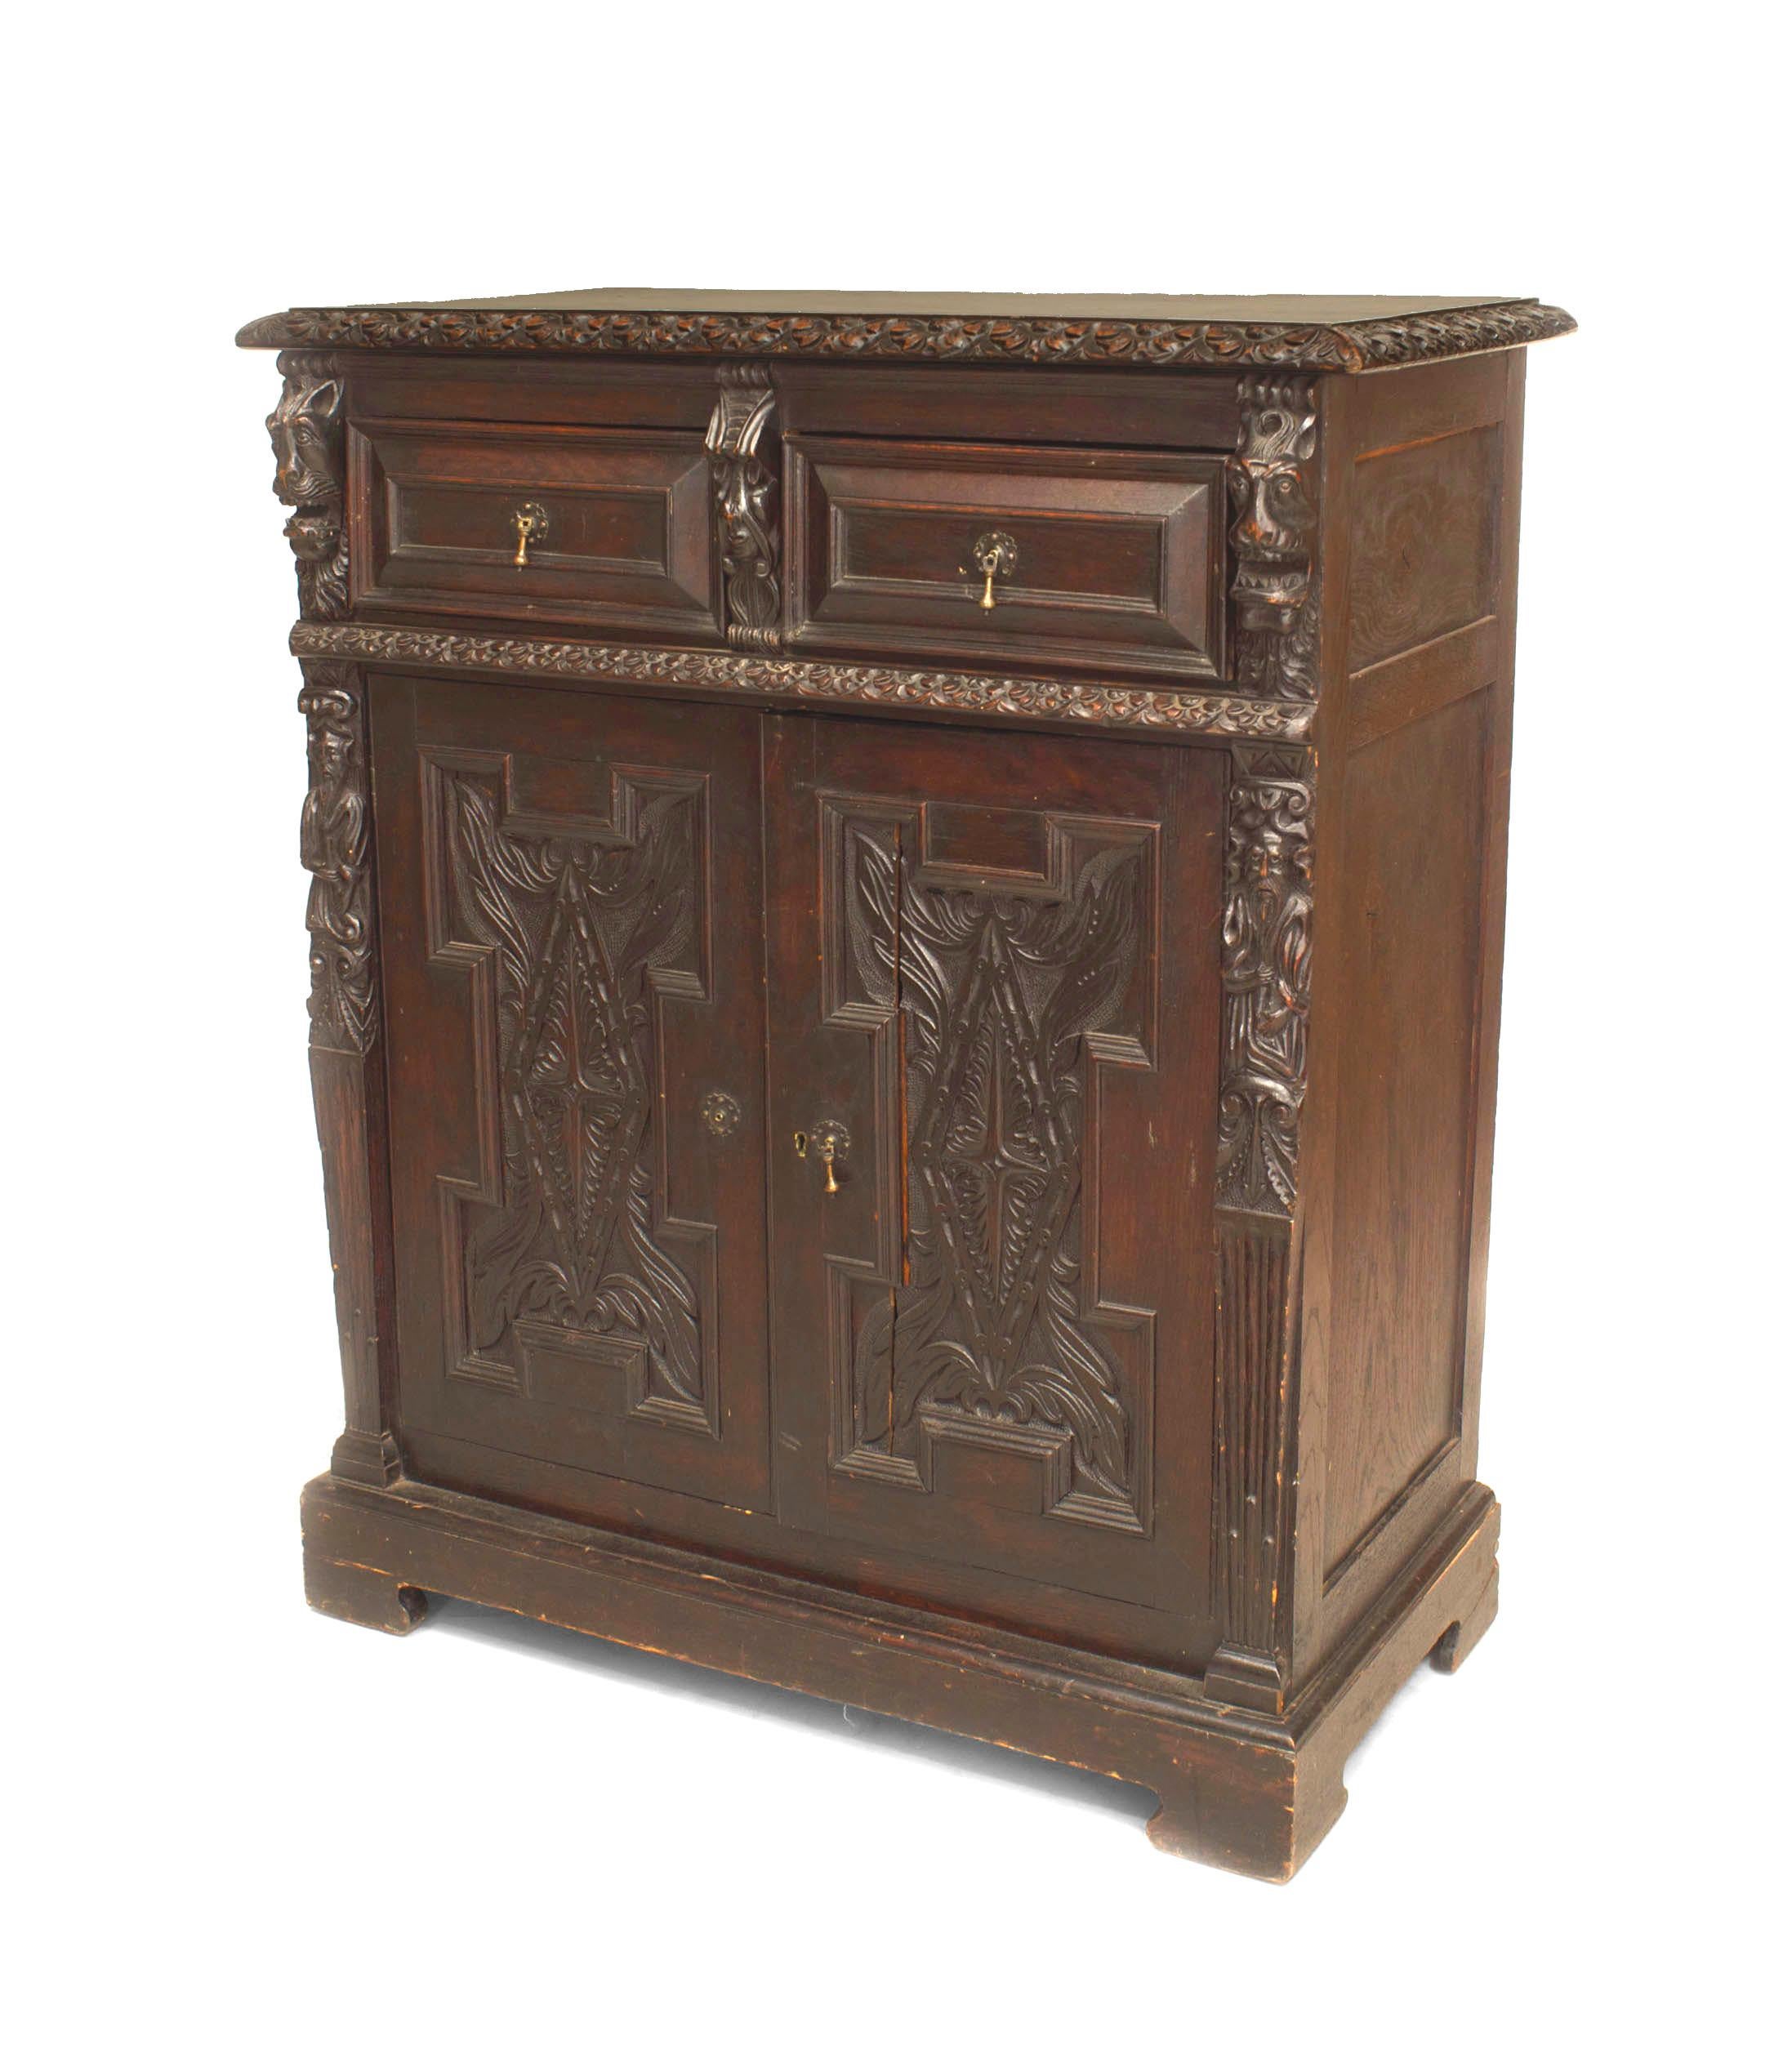 Pair of English Renaissance style (19/20th Century) dark stained oak carved 2 door sideboard cabinets with Wainscot panels and drawer (PRICED AS Pair).
